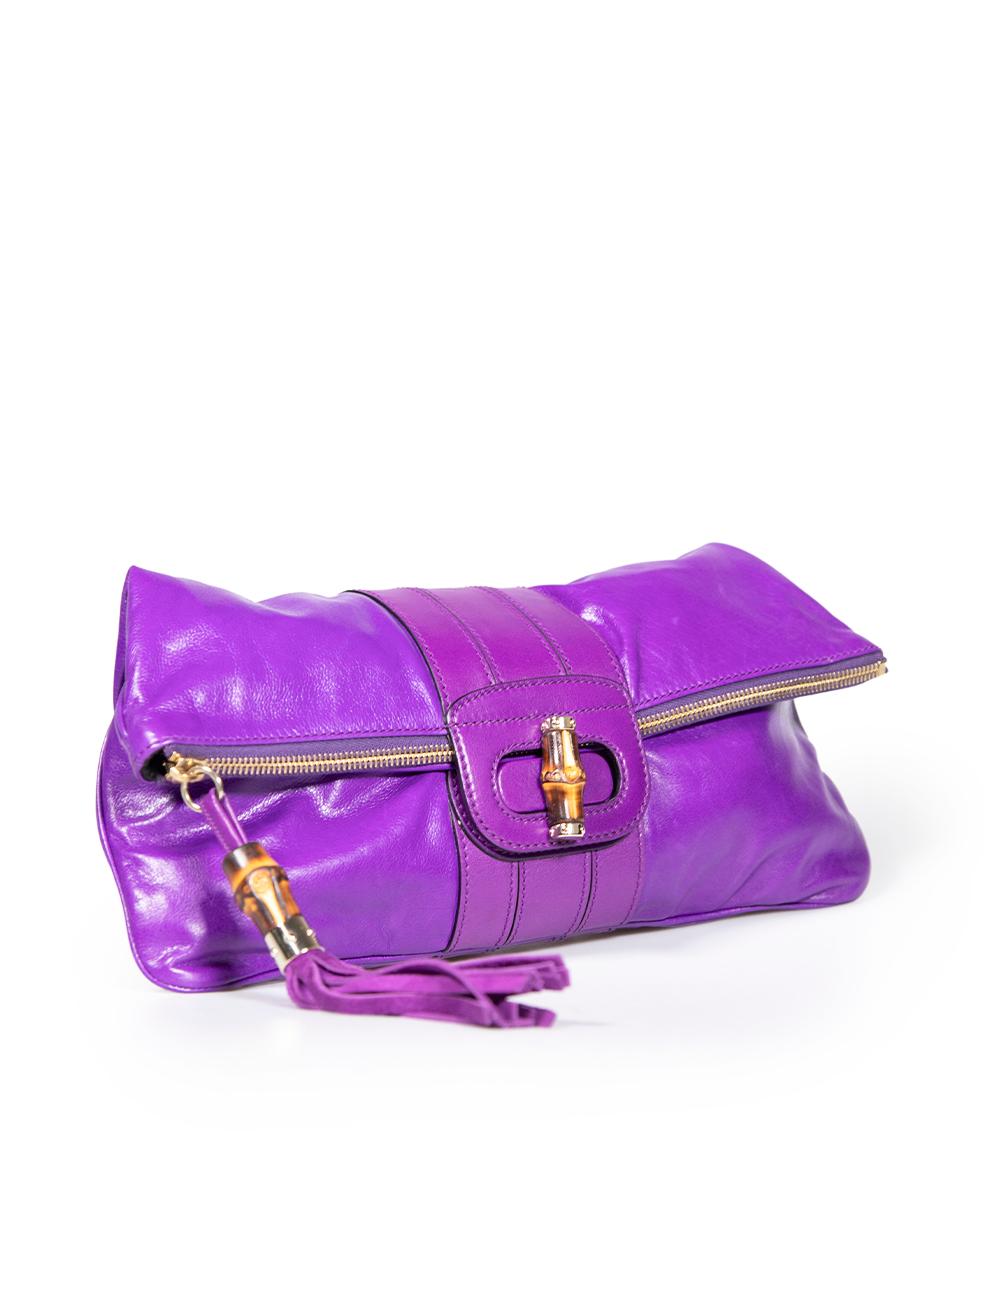 CONDITION is Very good. Minimal wear to clutch bag is evident. Minimal wear to the exterior with some very light scratching and creasing seen over the leather surface on this used Gucci designer resale item.
 
 
 
 Details
 
 
 Purple
 
 Leather
 
